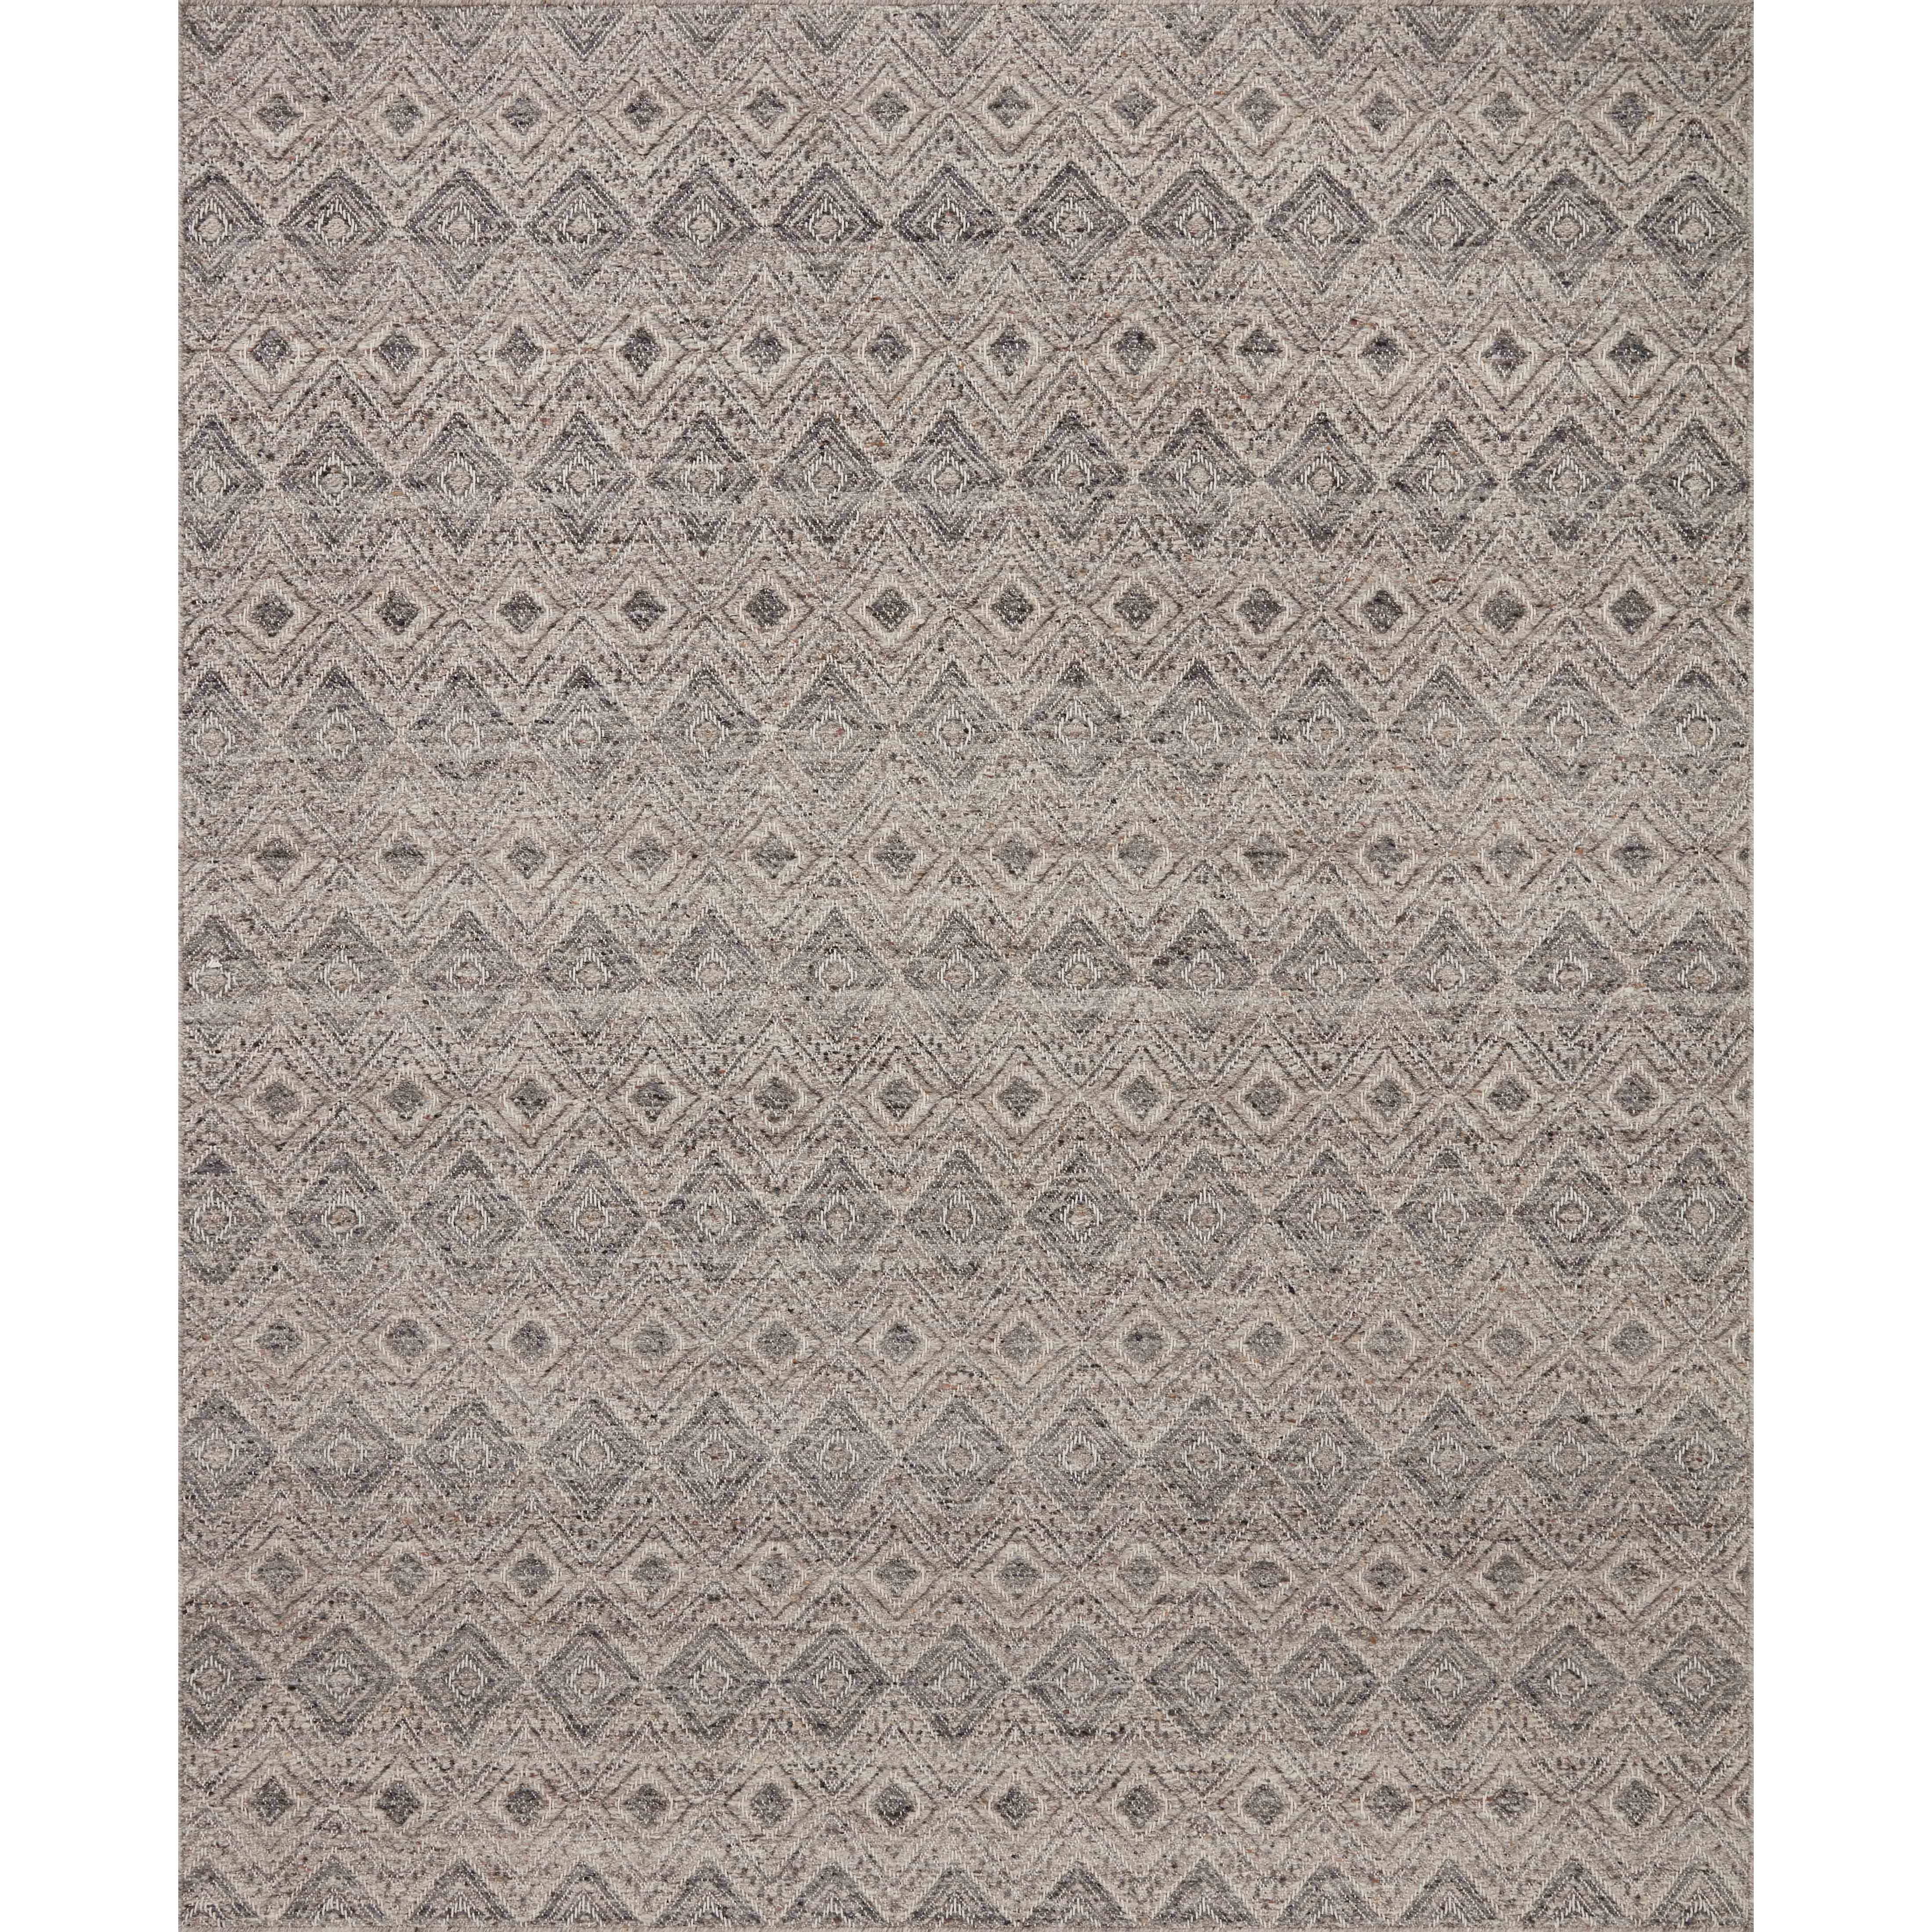 The Raven Taupe / Grey Rug is intricately handwoven with delicate, fine yarns that amplify the rug's layered and dimensional geometric design. While the rug itself is thick and sturdy, the colors and patterns have a casual lightness that can work in many spaces, from busy living rooms to serene bedrooms. Amethyst Home provides interior design, new construction, custom furniture, and area rugs in the Portland metro area.